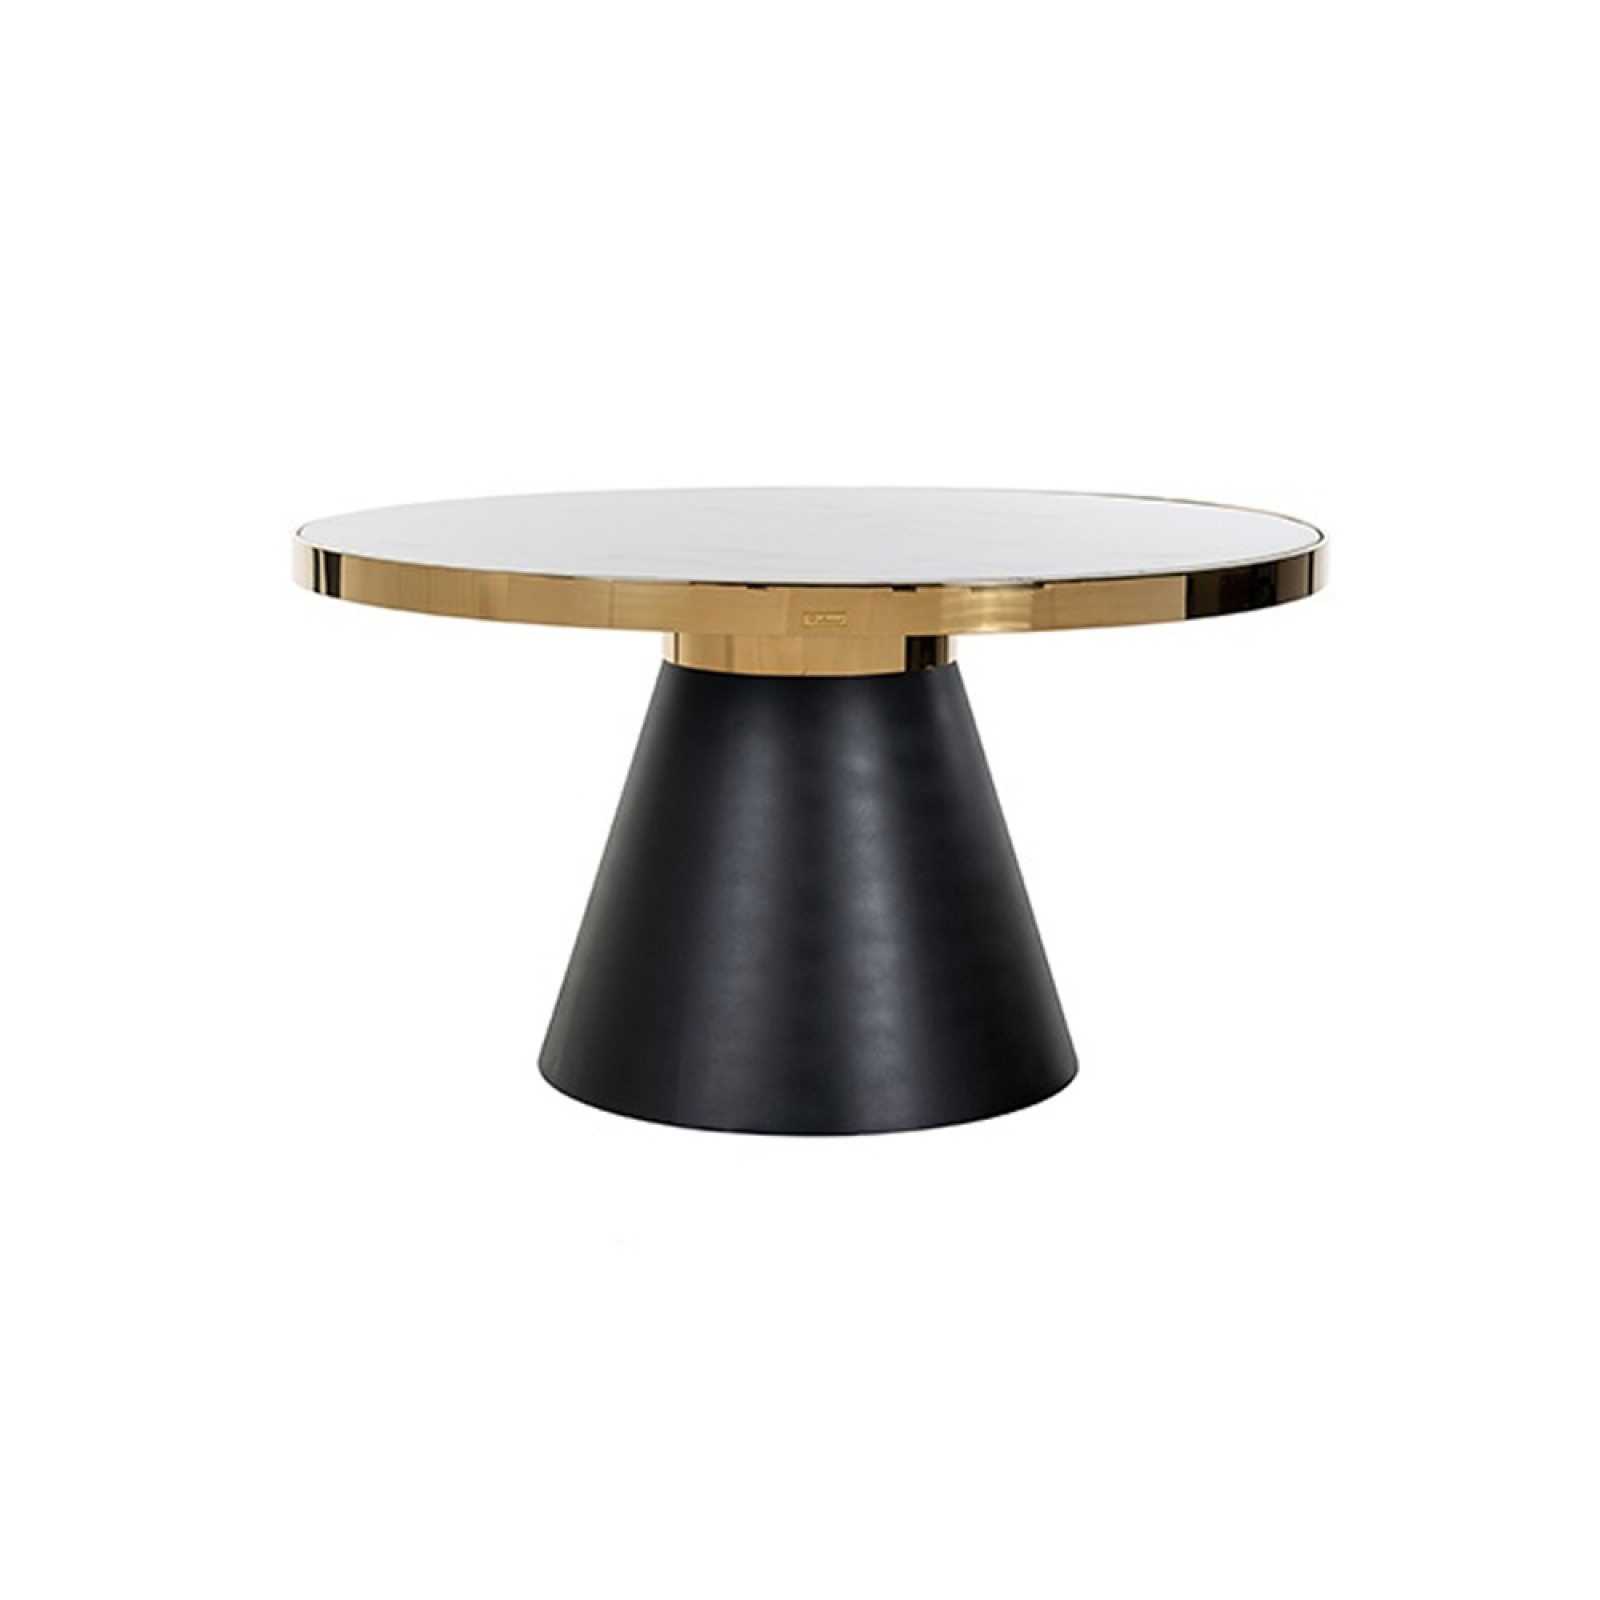 Odin dining table